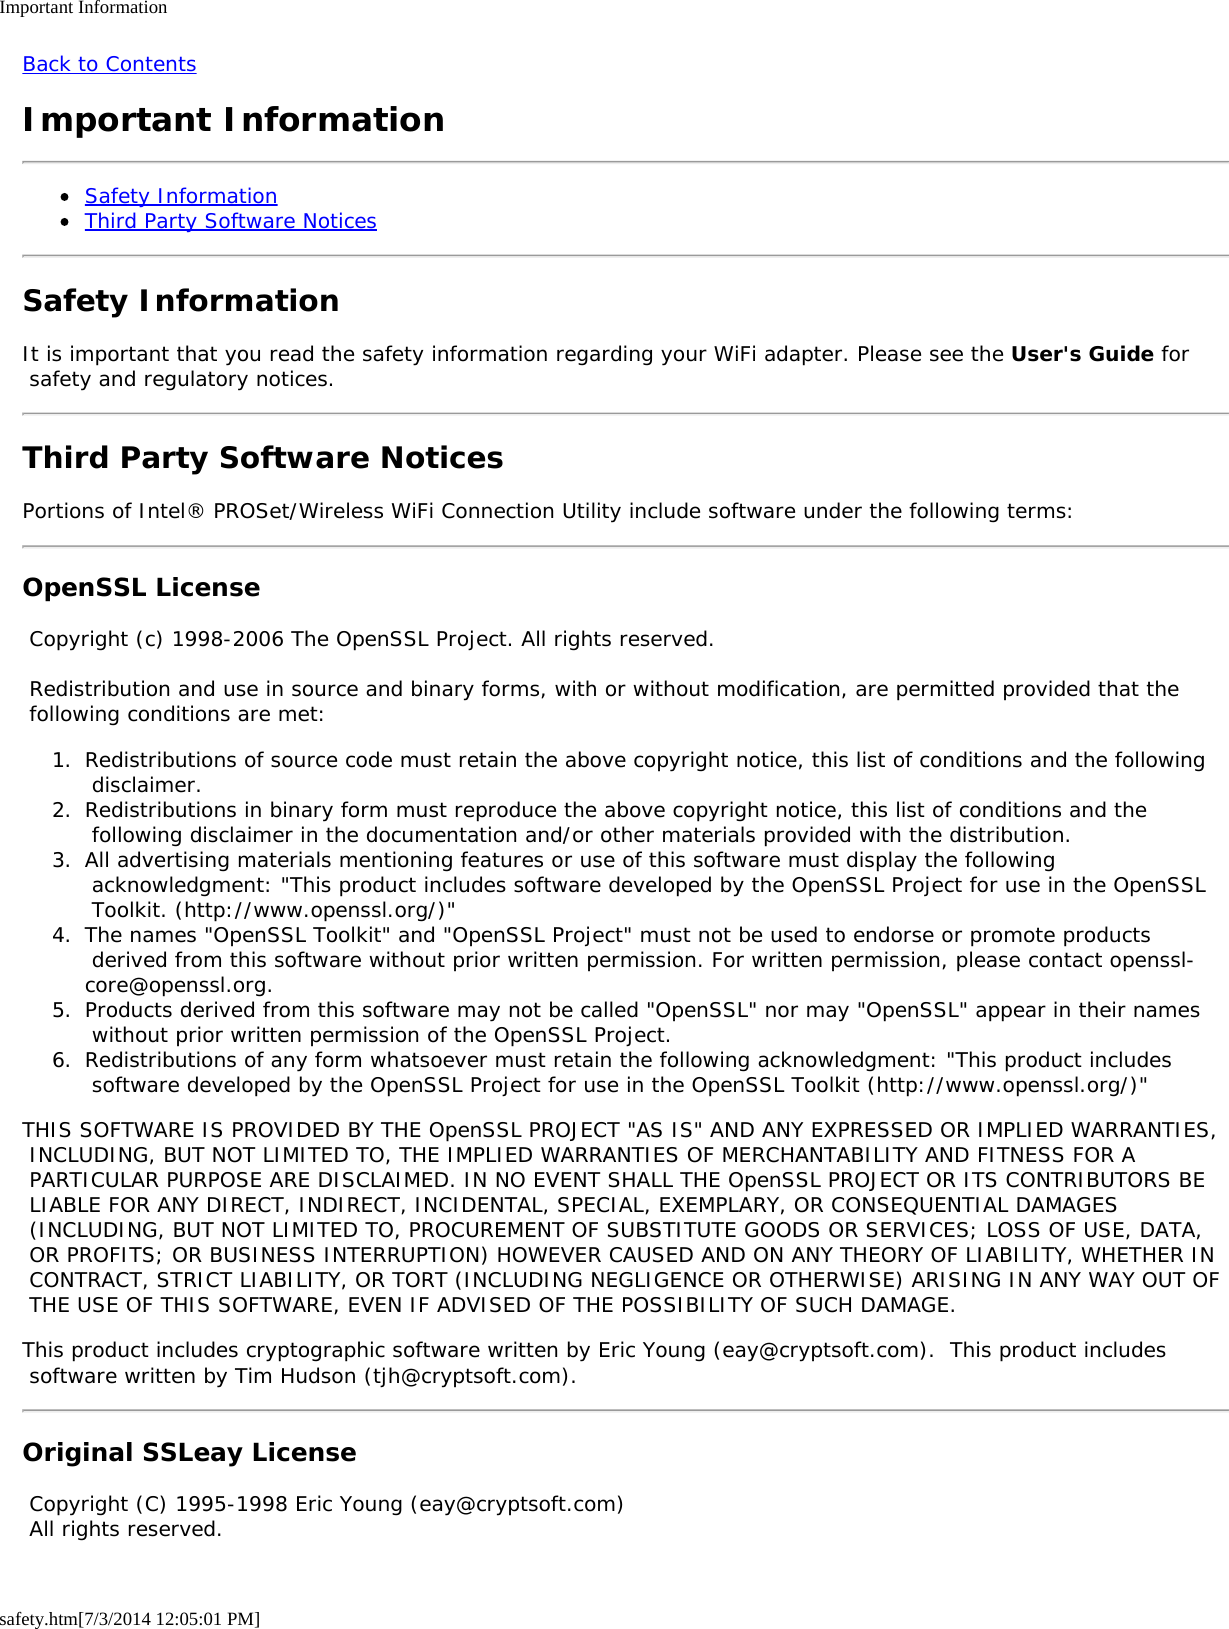 Important Informationsafety.htm[7/3/2014 12:05:01 PM]Back to ContentsImportant InformationSafety InformationThird Party Software NoticesSafety InformationIt is important that you read the safety information regarding your WiFi adapter. Please see the User&apos;s Guide for safety and regulatory notices.Third Party Software NoticesPortions of Intel® PROSet/Wireless WiFi Connection Utility include software under the following terms:OpenSSL License Copyright (c) 1998-2006 The OpenSSL Project. All rights reserved. Redistribution and use in source and binary forms, with or without modification, are permitted provided that the following conditions are met:1.  Redistributions of source code must retain the above copyright notice, this list of conditions and the following disclaimer.2.  Redistributions in binary form must reproduce the above copyright notice, this list of conditions and the following disclaimer in the documentation and/or other materials provided with the distribution.3.  All advertising materials mentioning features or use of this software must display the following acknowledgment: &quot;This product includes software developed by the OpenSSL Project for use in the OpenSSL Toolkit. (http://www.openssl.org/)&quot;4.  The names &quot;OpenSSL Toolkit&quot; and &quot;OpenSSL Project&quot; must not be used to endorse or promote products derived from this software without prior written permission. For written permission, please contact openssl-core@openssl.org.5.  Products derived from this software may not be called &quot;OpenSSL&quot; nor may &quot;OpenSSL&quot; appear in their names without prior written permission of the OpenSSL Project.6.  Redistributions of any form whatsoever must retain the following acknowledgment: &quot;This product includes software developed by the OpenSSL Project for use in the OpenSSL Toolkit (http://www.openssl.org/)&quot;THIS SOFTWARE IS PROVIDED BY THE OpenSSL PROJECT &quot;AS IS&quot; AND ANY EXPRESSED OR IMPLIED WARRANTIES, INCLUDING, BUT NOT LIMITED TO, THE IMPLIED WARRANTIES OF MERCHANTABILITY AND FITNESS FOR A PARTICULAR PURPOSE ARE DISCLAIMED. IN NO EVENT SHALL THE OpenSSL PROJECT OR ITS CONTRIBUTORS BE LIABLE FOR ANY DIRECT, INDIRECT, INCIDENTAL, SPECIAL, EXEMPLARY, OR CONSEQUENTIAL DAMAGES (INCLUDING, BUT NOT LIMITED TO, PROCUREMENT OF SUBSTITUTE GOODS OR SERVICES; LOSS OF USE, DATA, OR PROFITS; OR BUSINESS INTERRUPTION) HOWEVER CAUSED AND ON ANY THEORY OF LIABILITY, WHETHER IN CONTRACT, STRICT LIABILITY, OR TORT (INCLUDING NEGLIGENCE OR OTHERWISE) ARISING IN ANY WAY OUT OF THE USE OF THIS SOFTWARE, EVEN IF ADVISED OF THE POSSIBILITY OF SUCH DAMAGE.This product includes cryptographic software written by Eric Young (eay@cryptsoft.com).  This product includes software written by Tim Hudson (tjh@cryptsoft.com).Original SSLeay License Copyright (C) 1995-1998 Eric Young (eay@cryptsoft.com) All rights reserved.